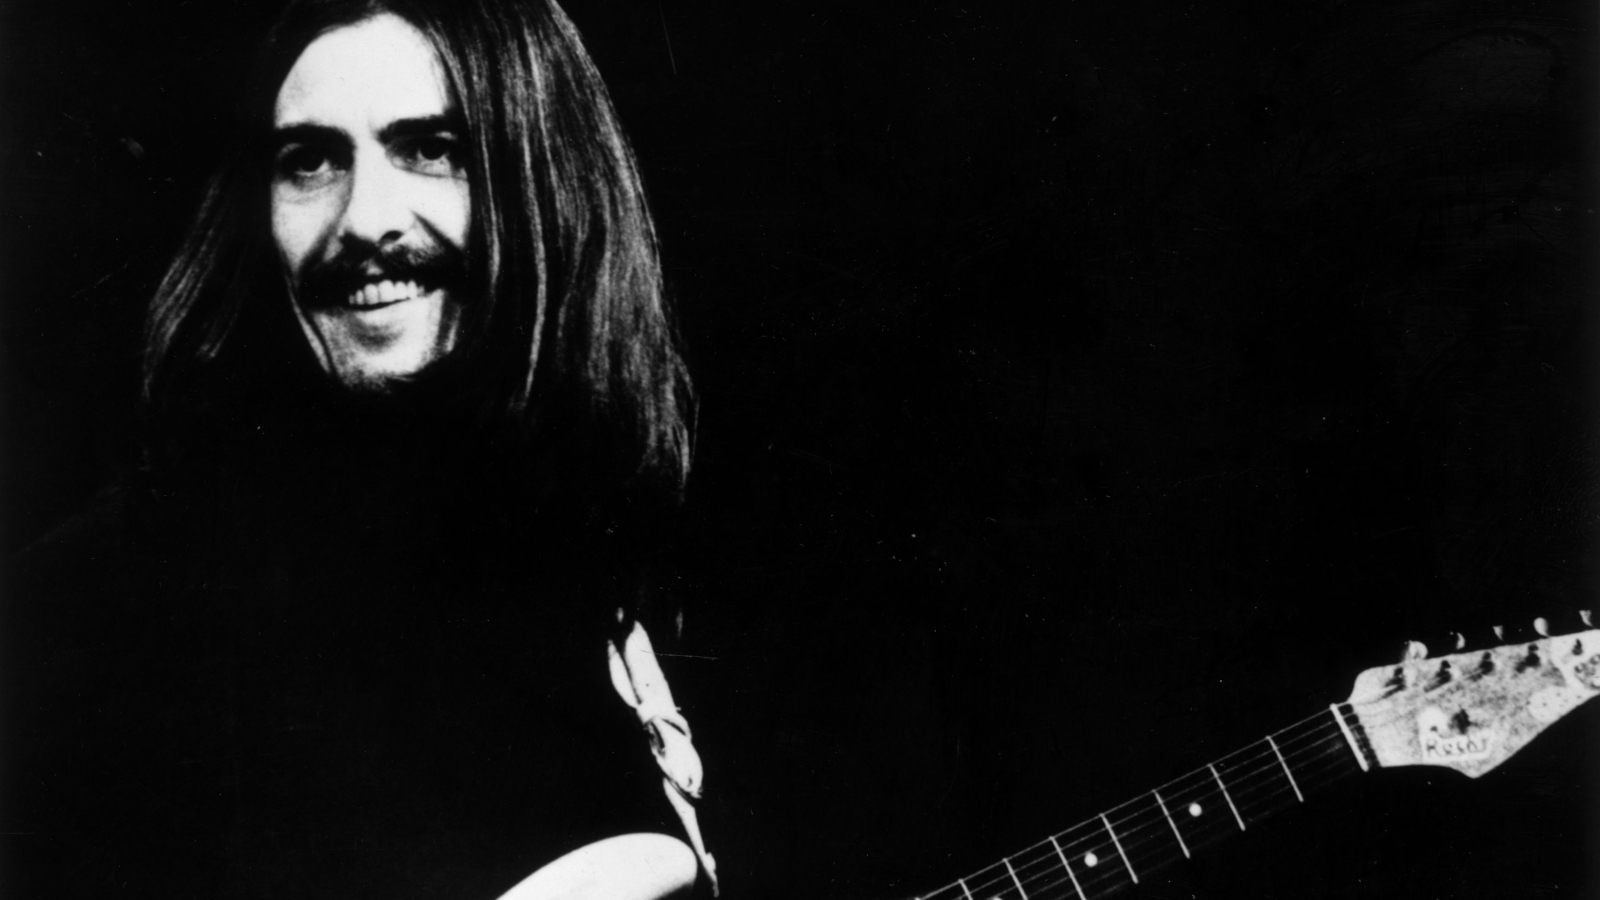 The 3 artists George Harrison said he liked to listen to in the 70s